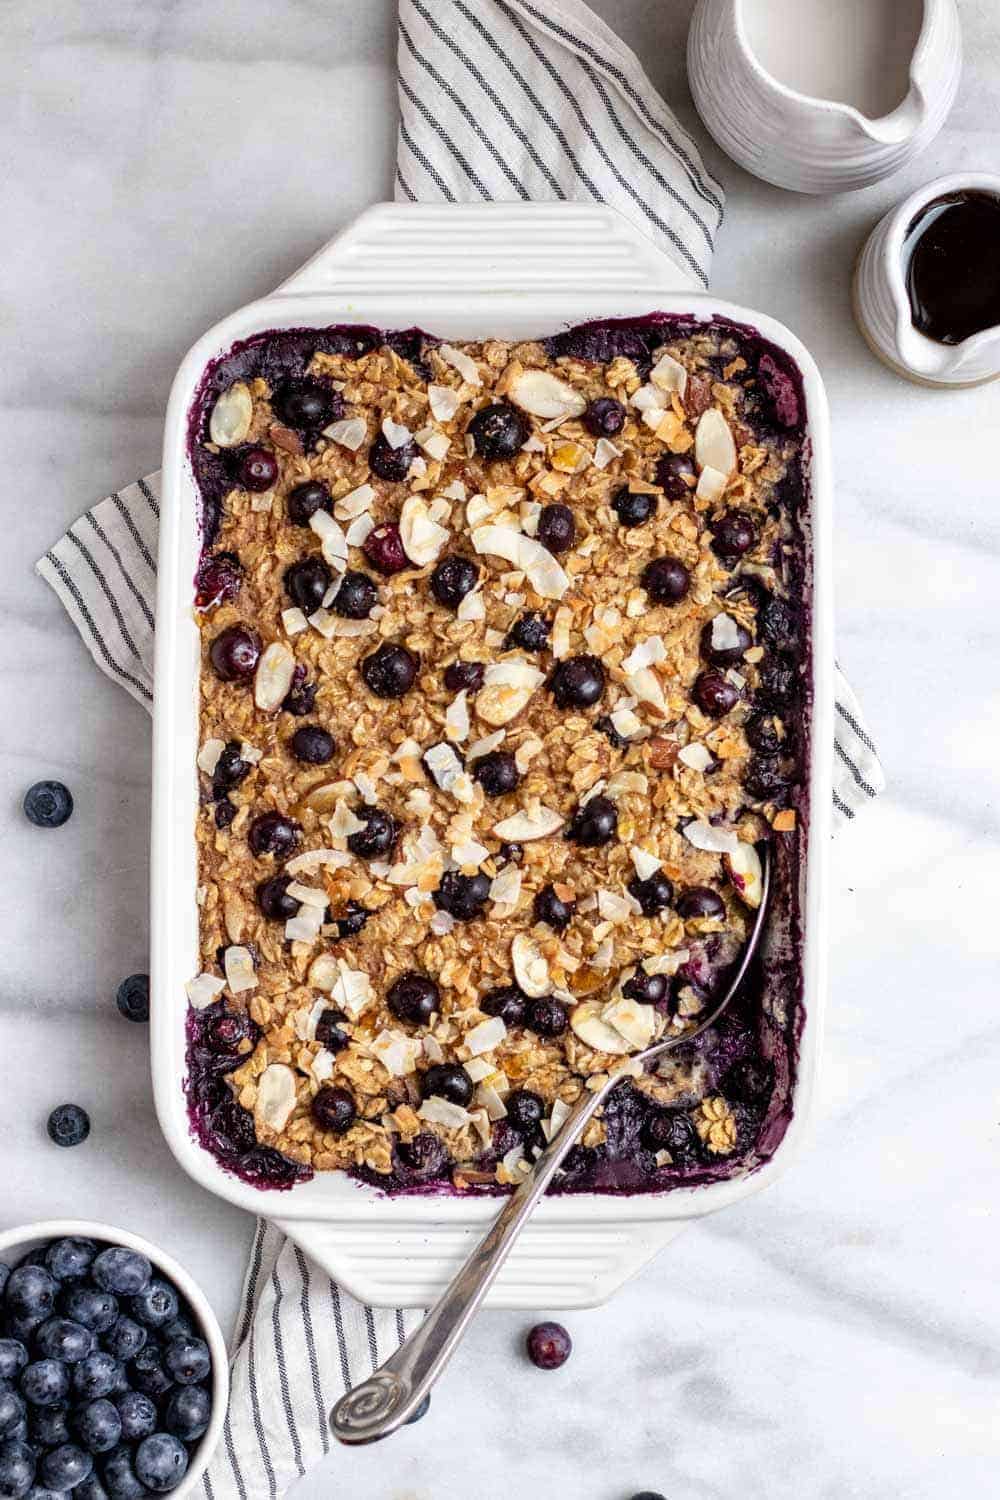 Maple cinnamon blueberry baked oatmeal in a large white baking dish.